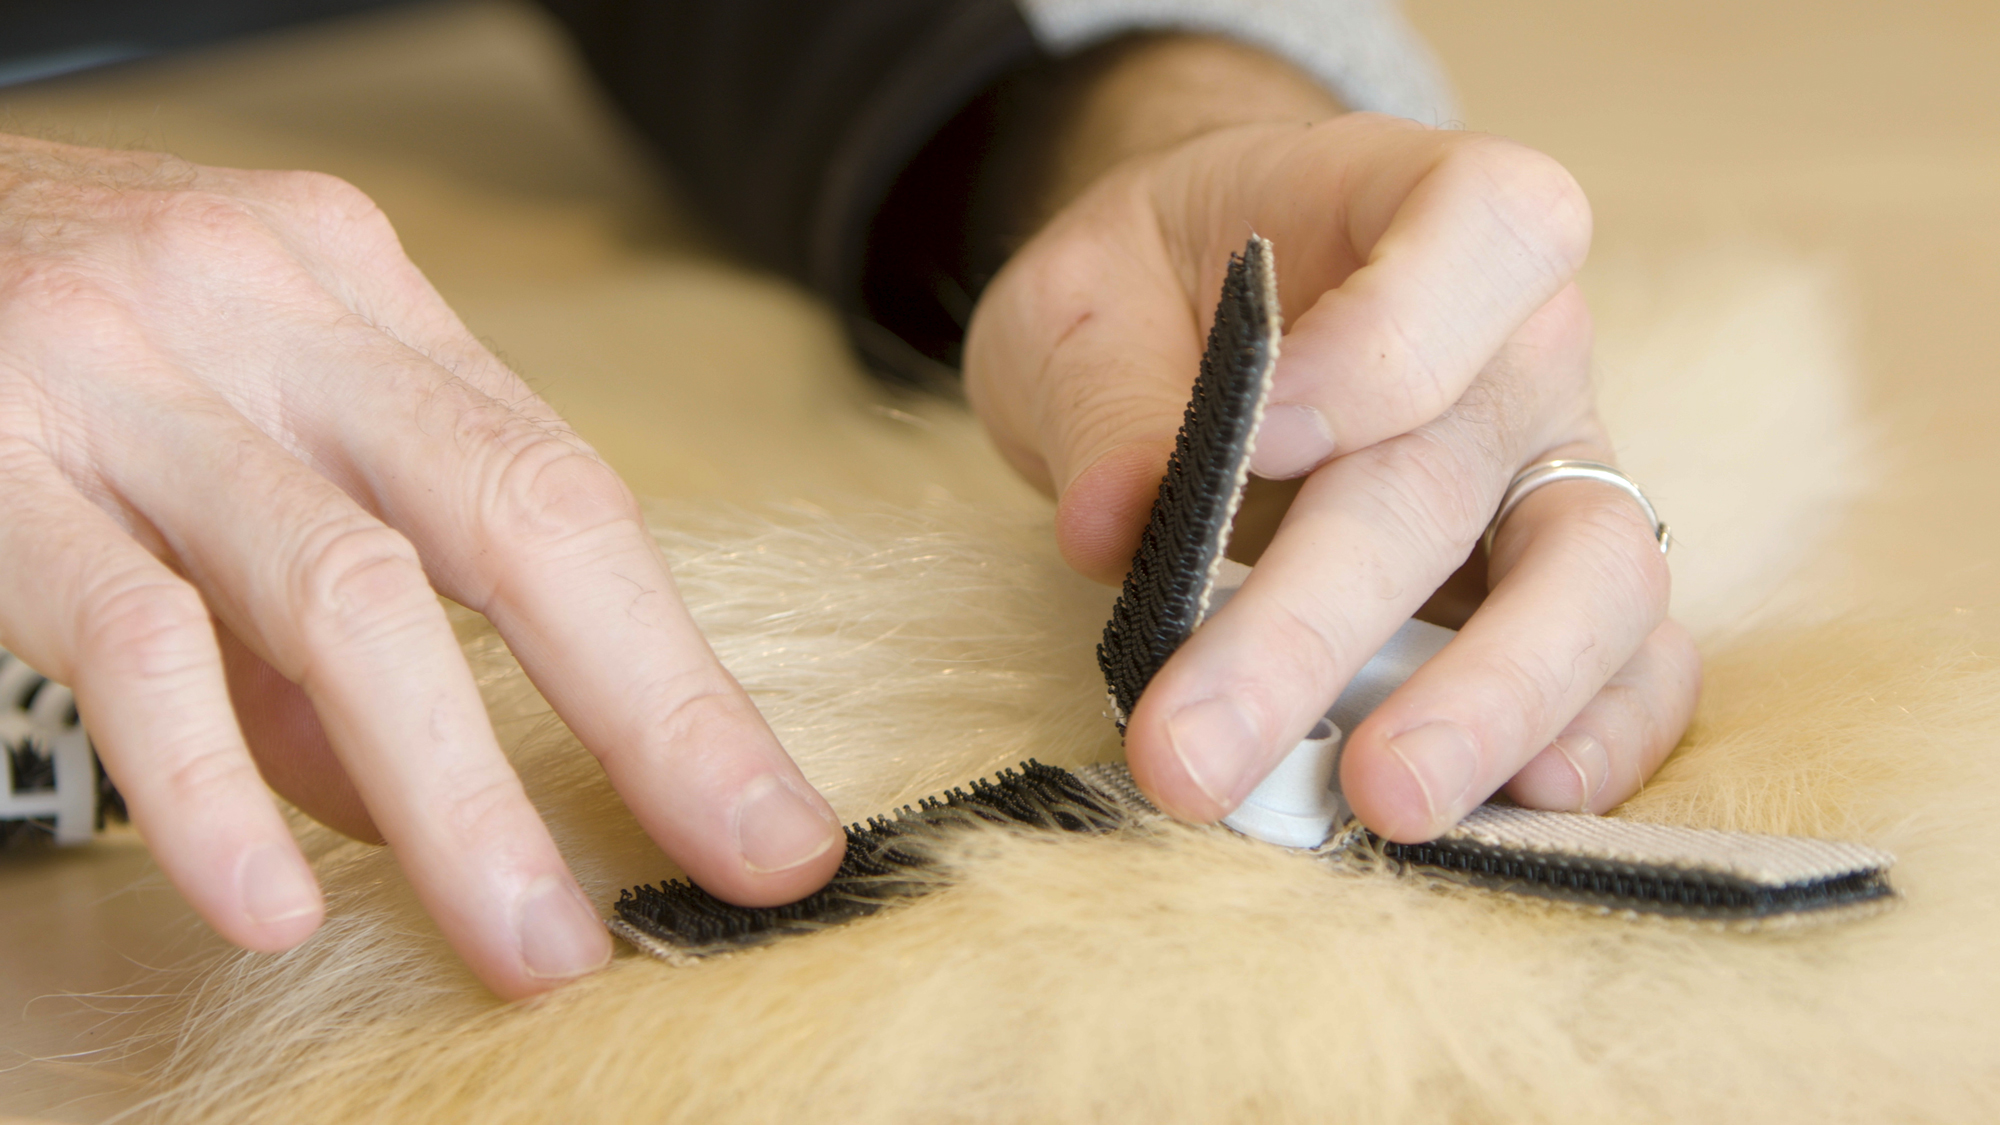 Some of the tag prototypes use simple adhesives, while others use 3M's Velcro-like fastener technology to securely hold onto an animal's fur. (Image: 3M)